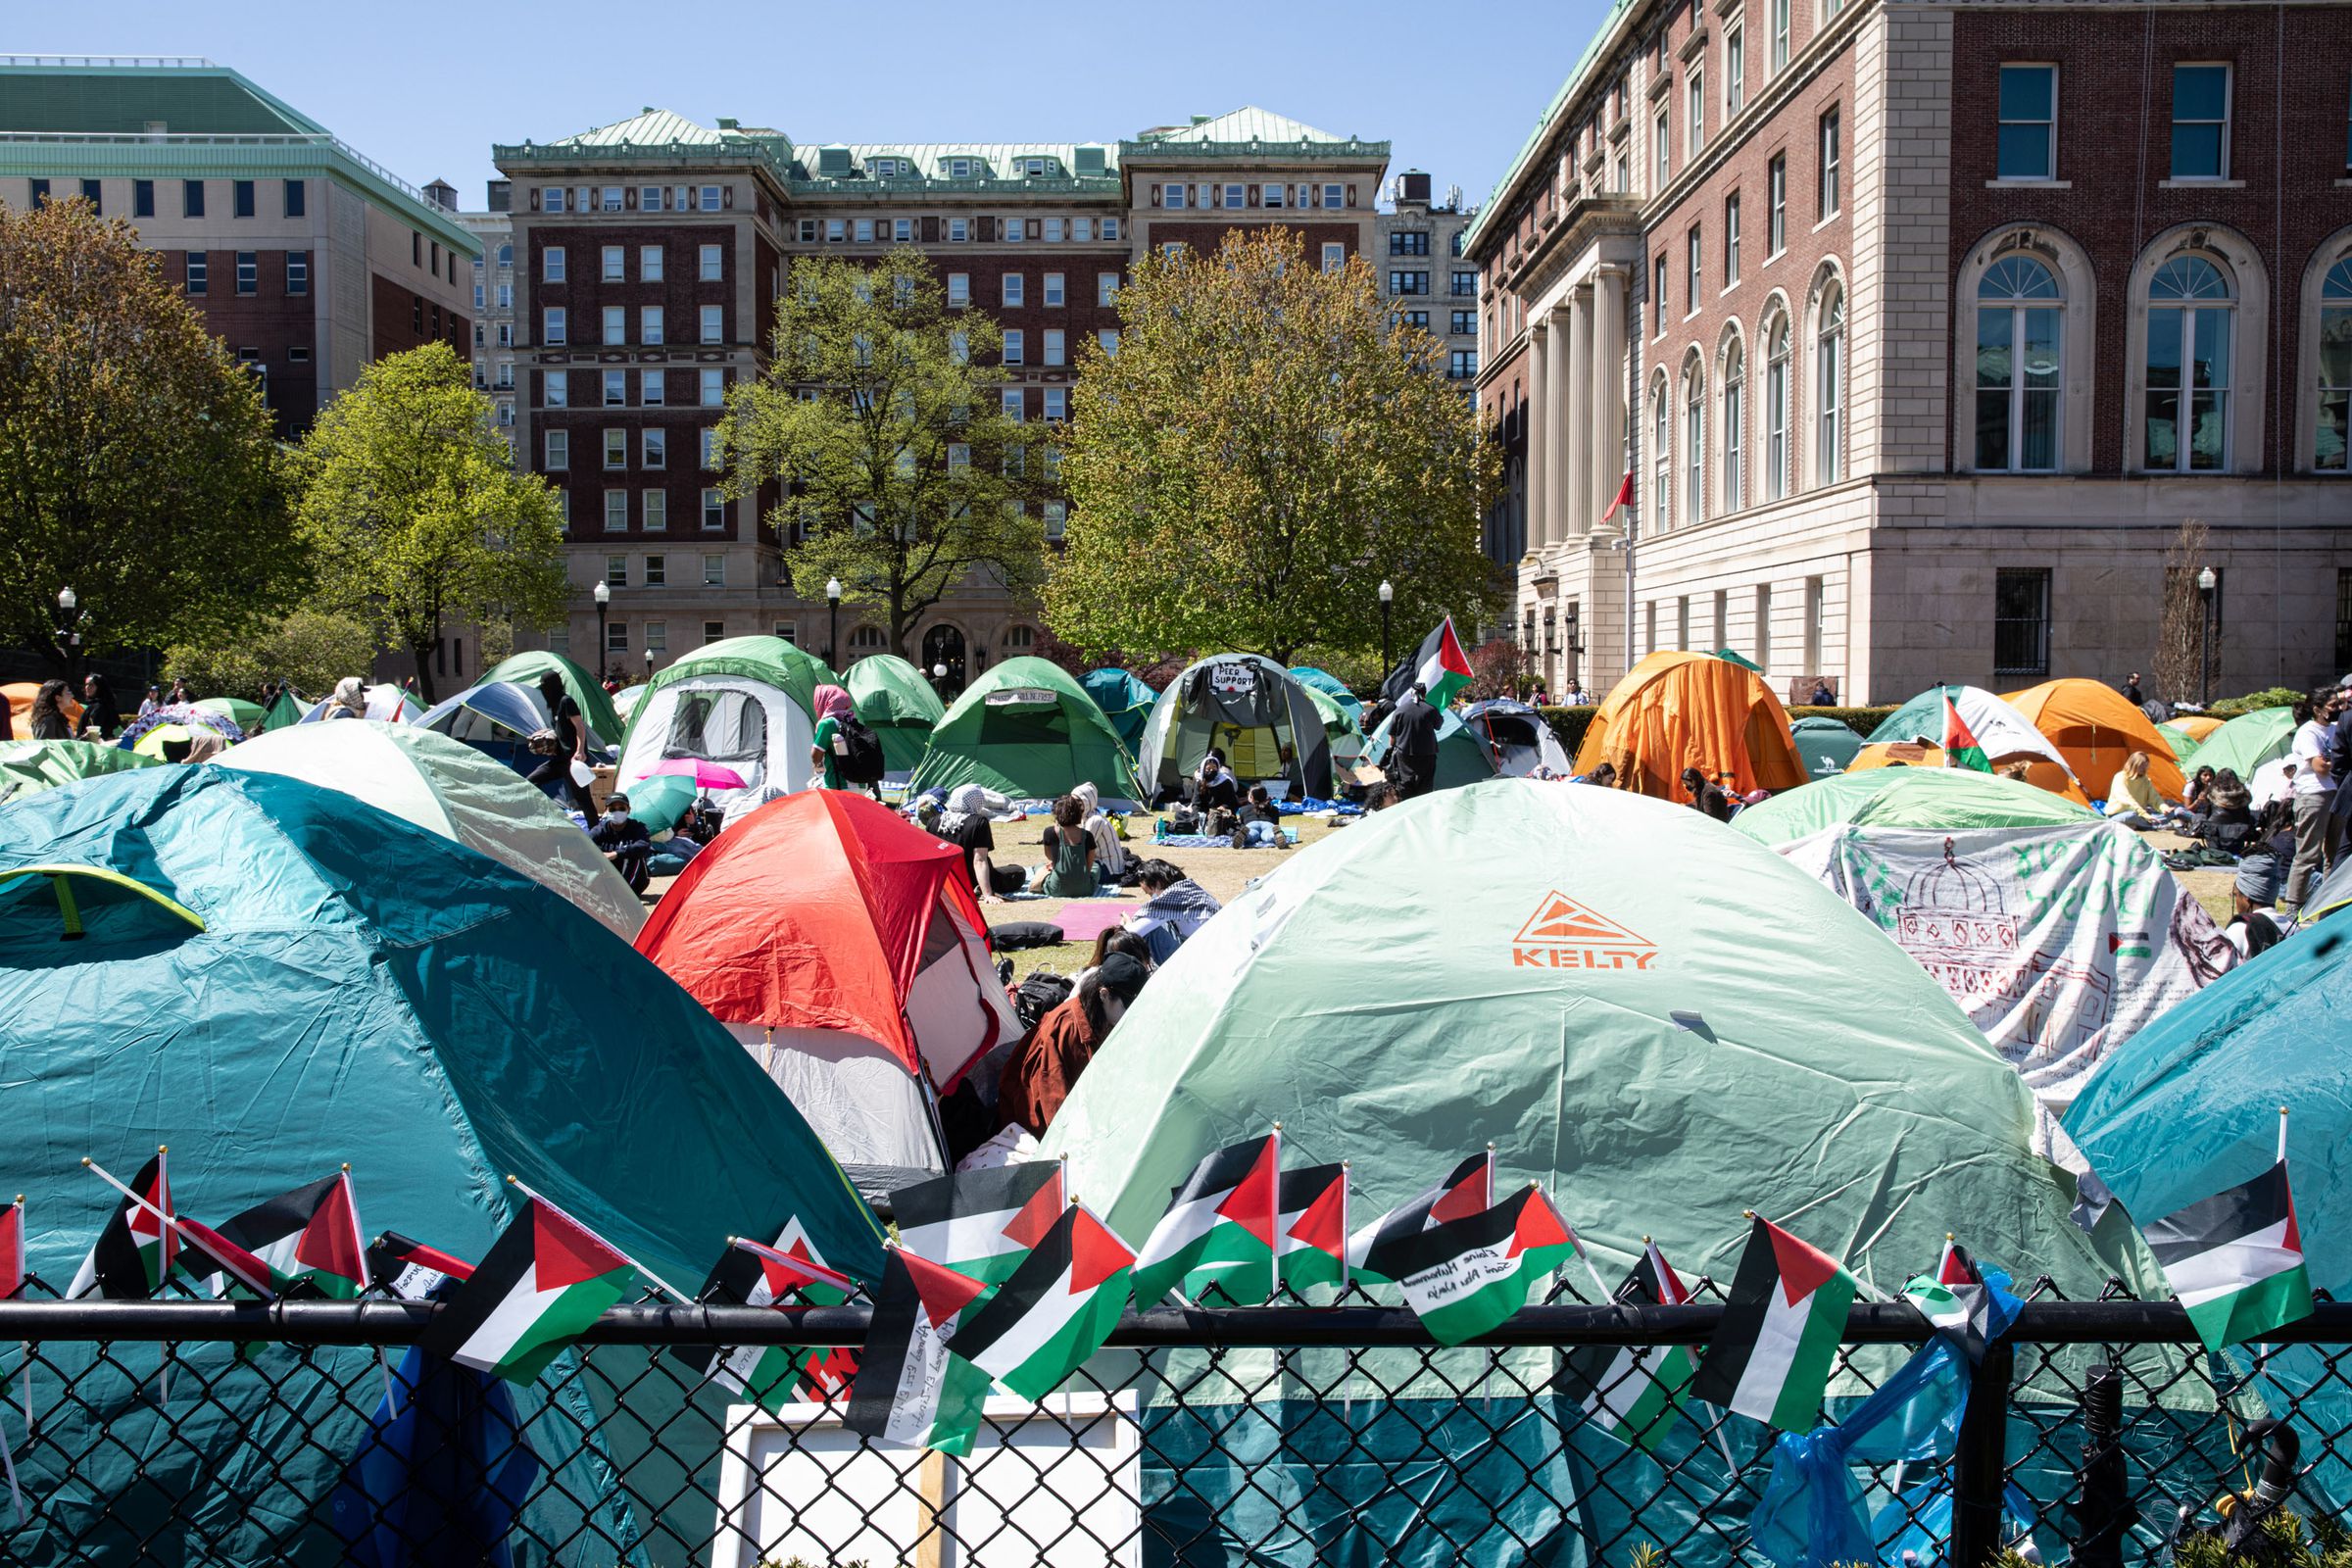 A photo of tents on a university quad, behind a low fence adorned with small Palestinian flags.